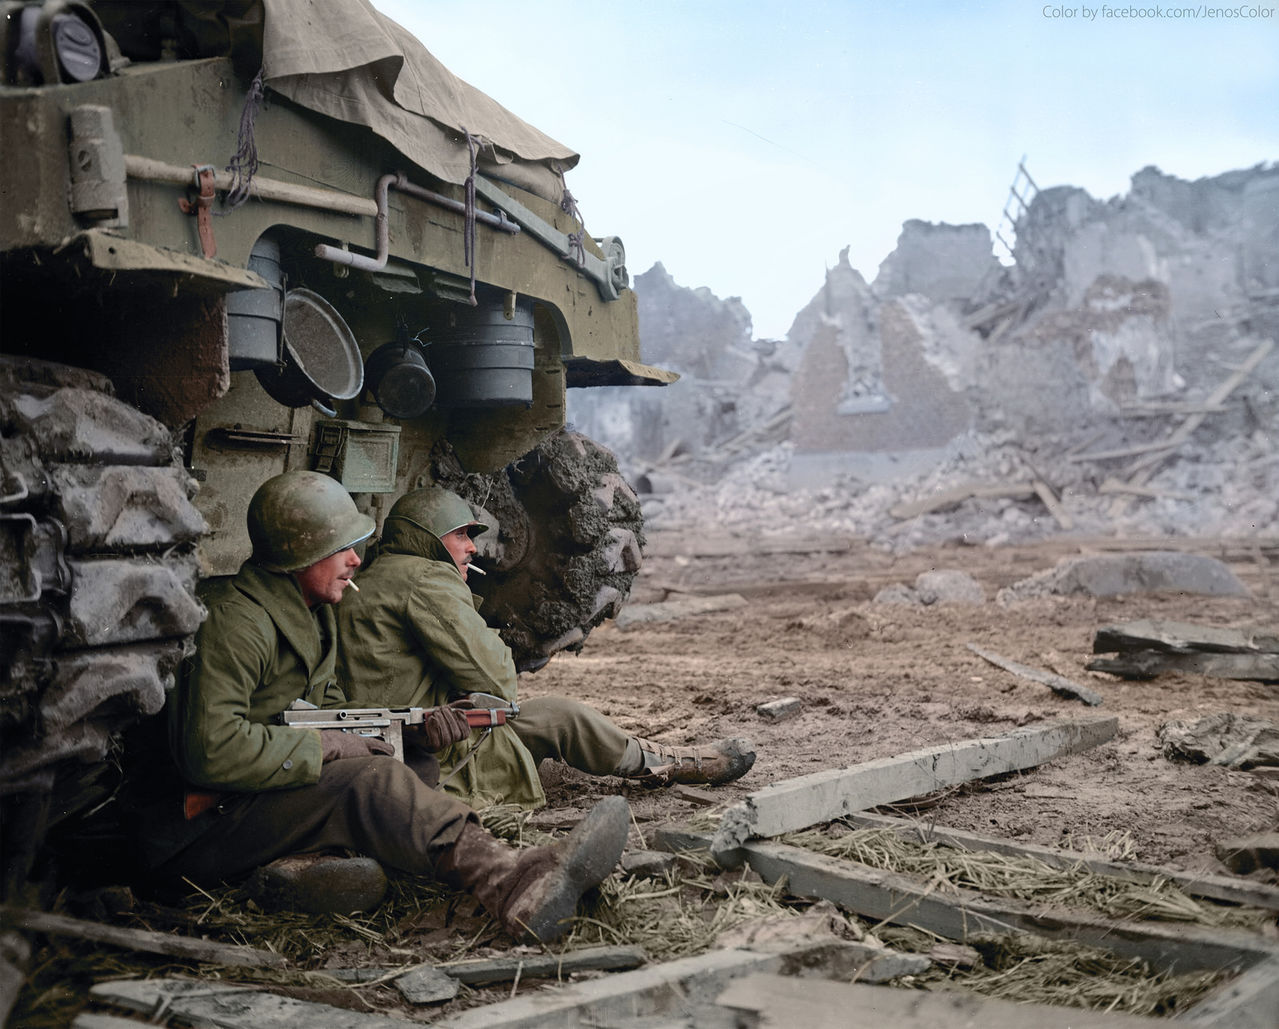 Two U.S. soldiers of C Company, 36th Armored Infantry Regiment, 3rd Infantry Division seek shelter behind a M-4 Sherman tank at Geich, near Düren, Germany, on 11 December 1944.